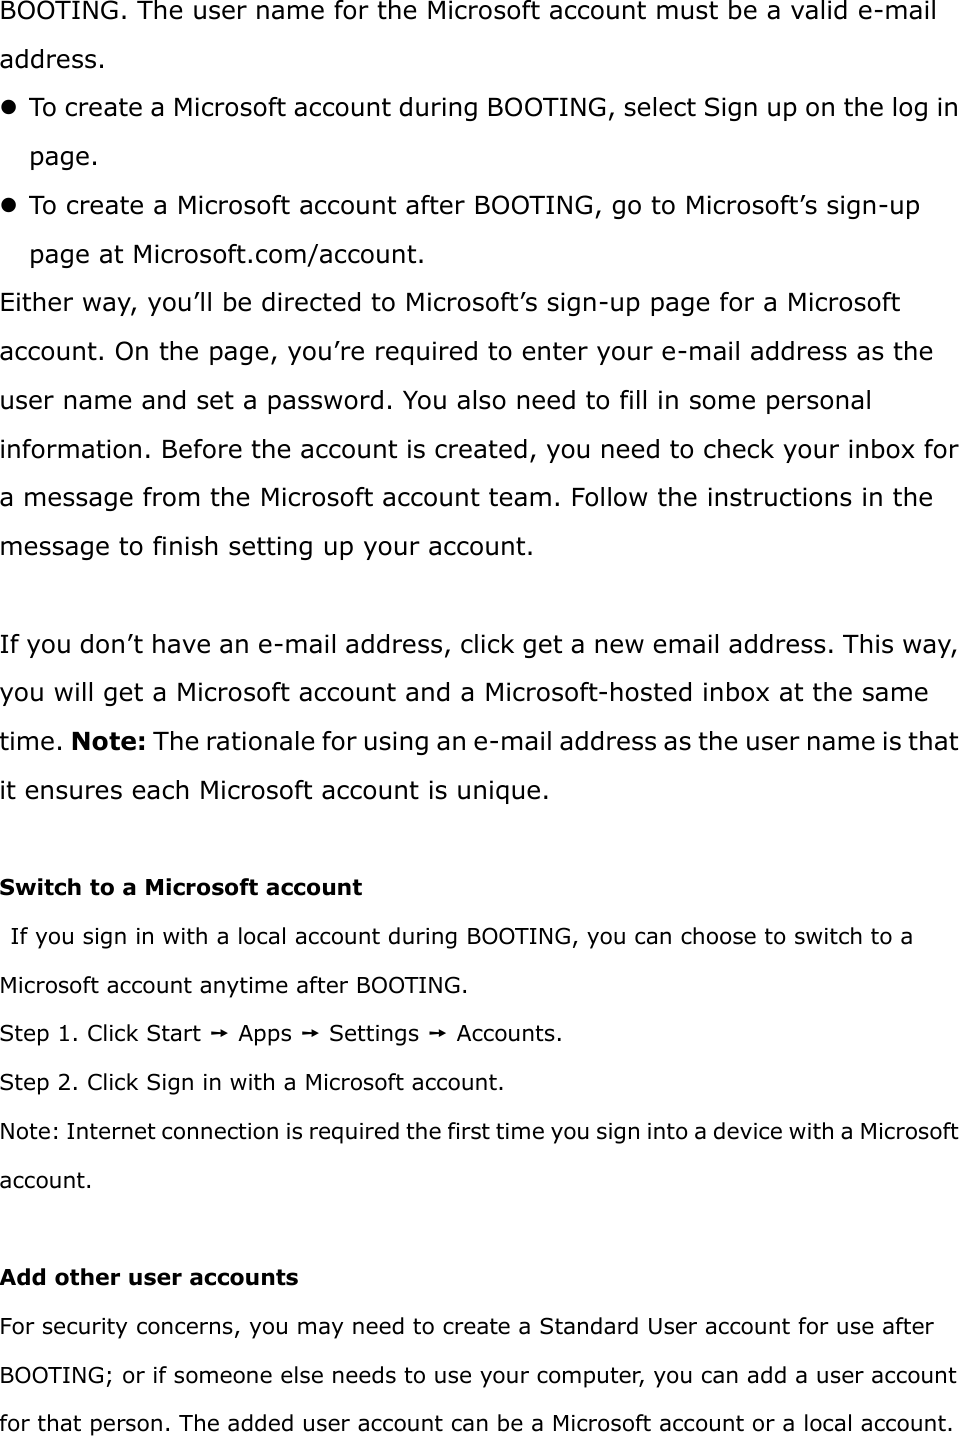 BOOTING. The user name for the Microsoft account must be a valid e-mail address.    To create a Microsoft account during BOOTING, select Sign up on the log in page.    To create a Microsoft account after BOOTING, go to Microsoft’s sign-up page at Microsoft.com/account.   Either way, you’ll be directed to Microsoft’s sign-up page for a Microsoft account. On the page, you’re required to enter your e-mail address as the user name and set a password. You also need to fill in some personal information. Before the account is created, you need to check your inbox for a message from the Microsoft account team. Follow the instructions in the message to finish setting up your account.  If you don’t have an e-mail address, click get a new email address. This way, you will get a Microsoft account and a Microsoft-hosted inbox at the same time. Note: The rationale for using an e-mail address as the user name is that it ensures each Microsoft account is unique.  Switch to a Microsoft account   If you sign in with a local account during BOOTING, you can choose to switch to a Microsoft account anytime after BOOTING.   Step 1. Click Start ➙ Apps ➙ Settings ➙ Accounts. Step 2. Click Sign in with a Microsoft account. Note: Internet connection is required the first time you sign into a device with a Microsoft account.    Add other user accounts For security concerns, you may need to create a Standard User account for use after BOOTING; or if someone else needs to use your computer, you can add a user account for that person. The added user account can be a Microsoft account or a local account.   